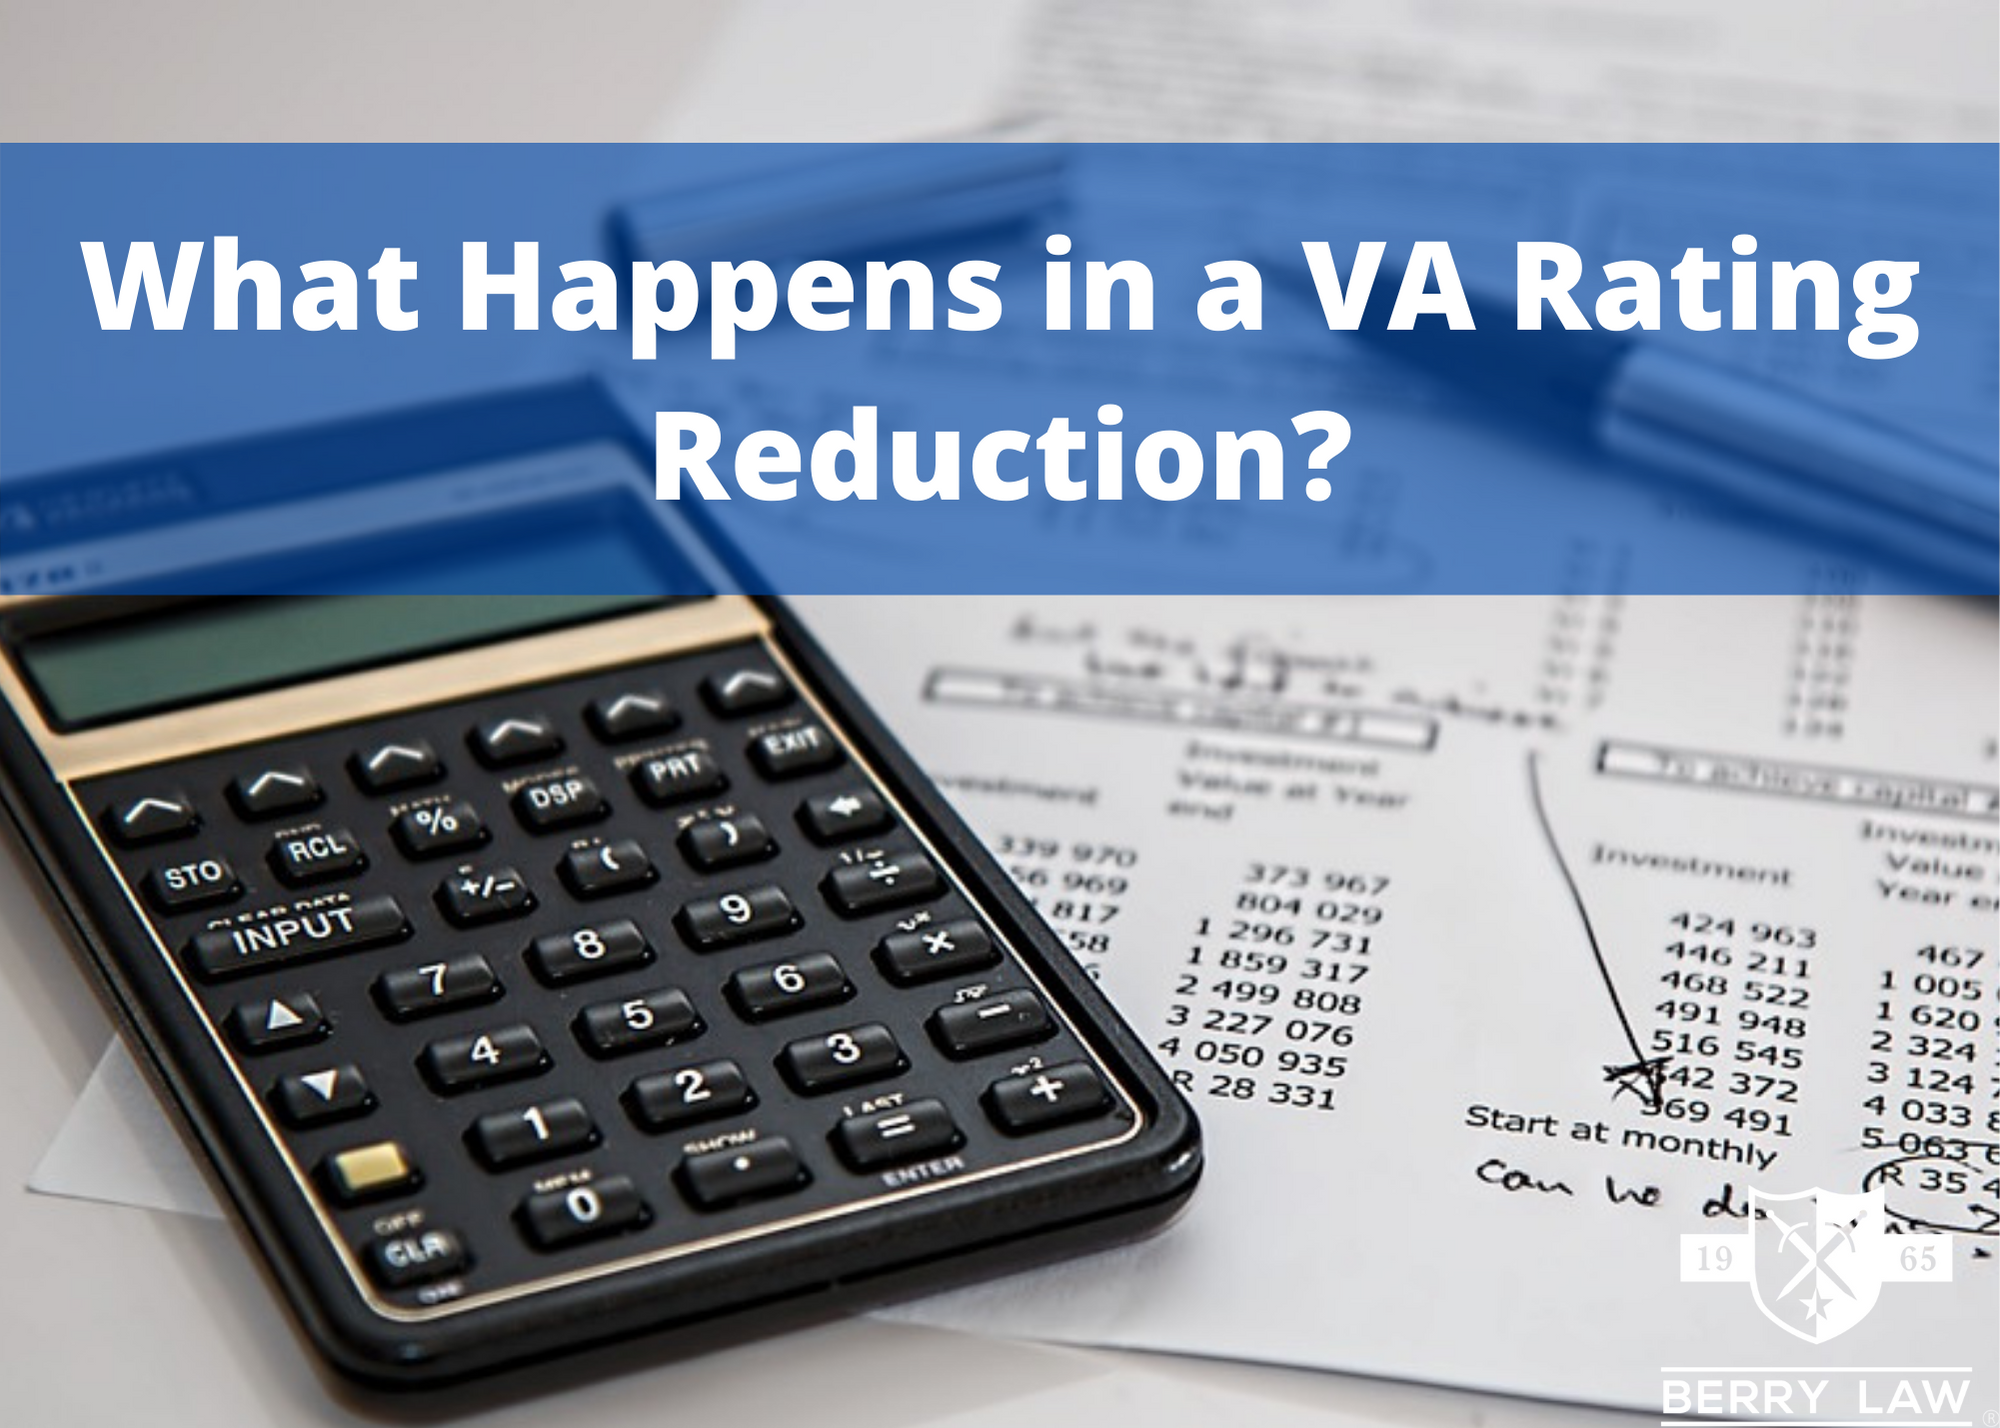 What Happens in a VA Rating Reduction?